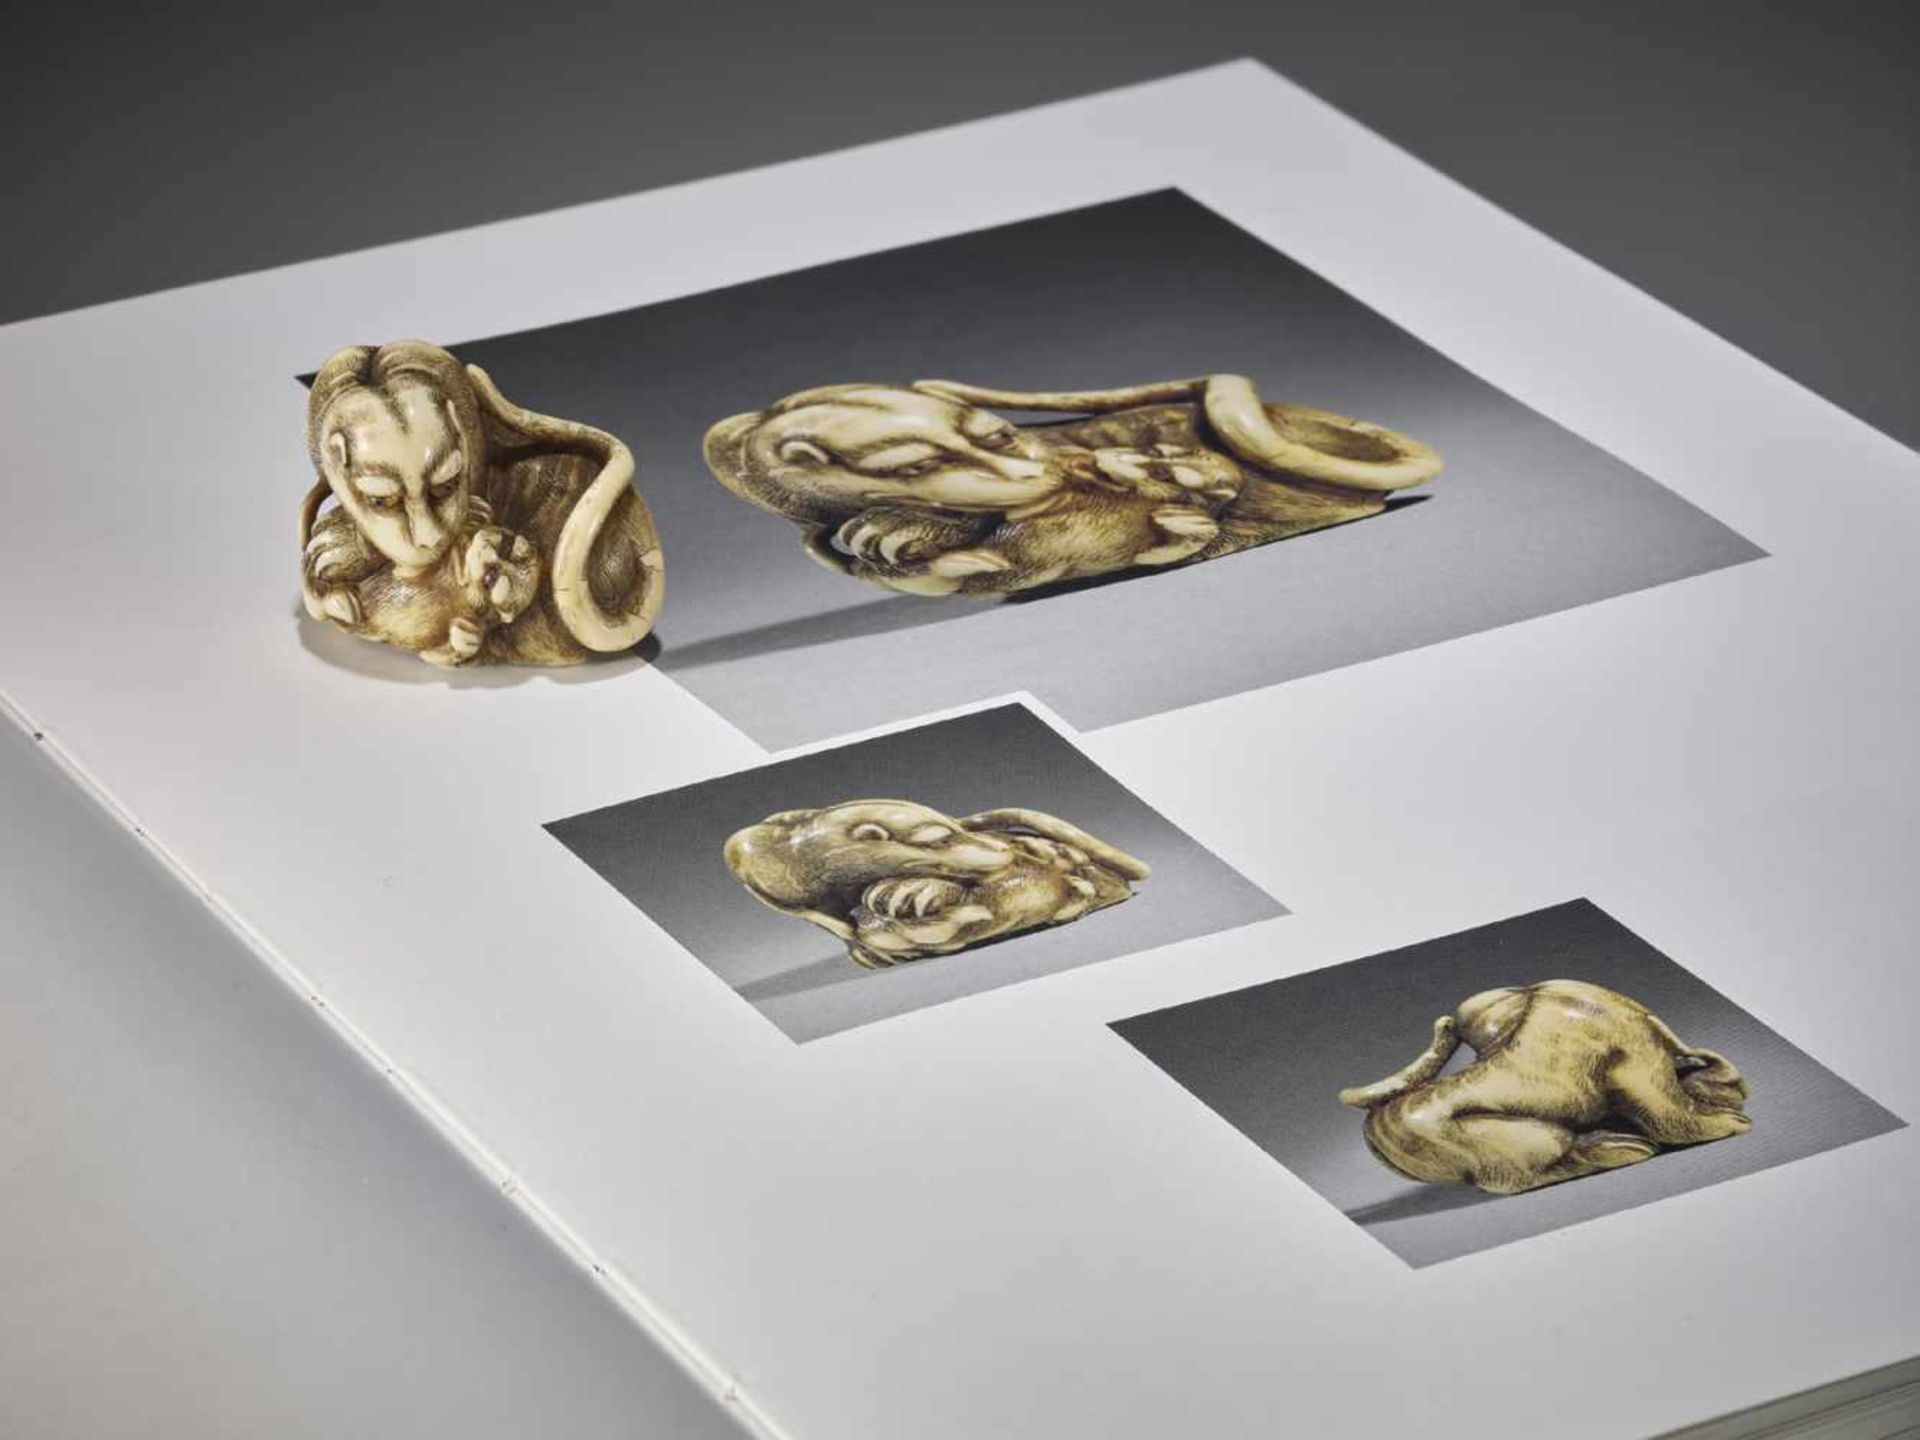 UNSHO HAKURYU I: AN EXCEPTIONAL IVORY NETSUKE OF A TIGER WITH CUB - Image 4 of 10